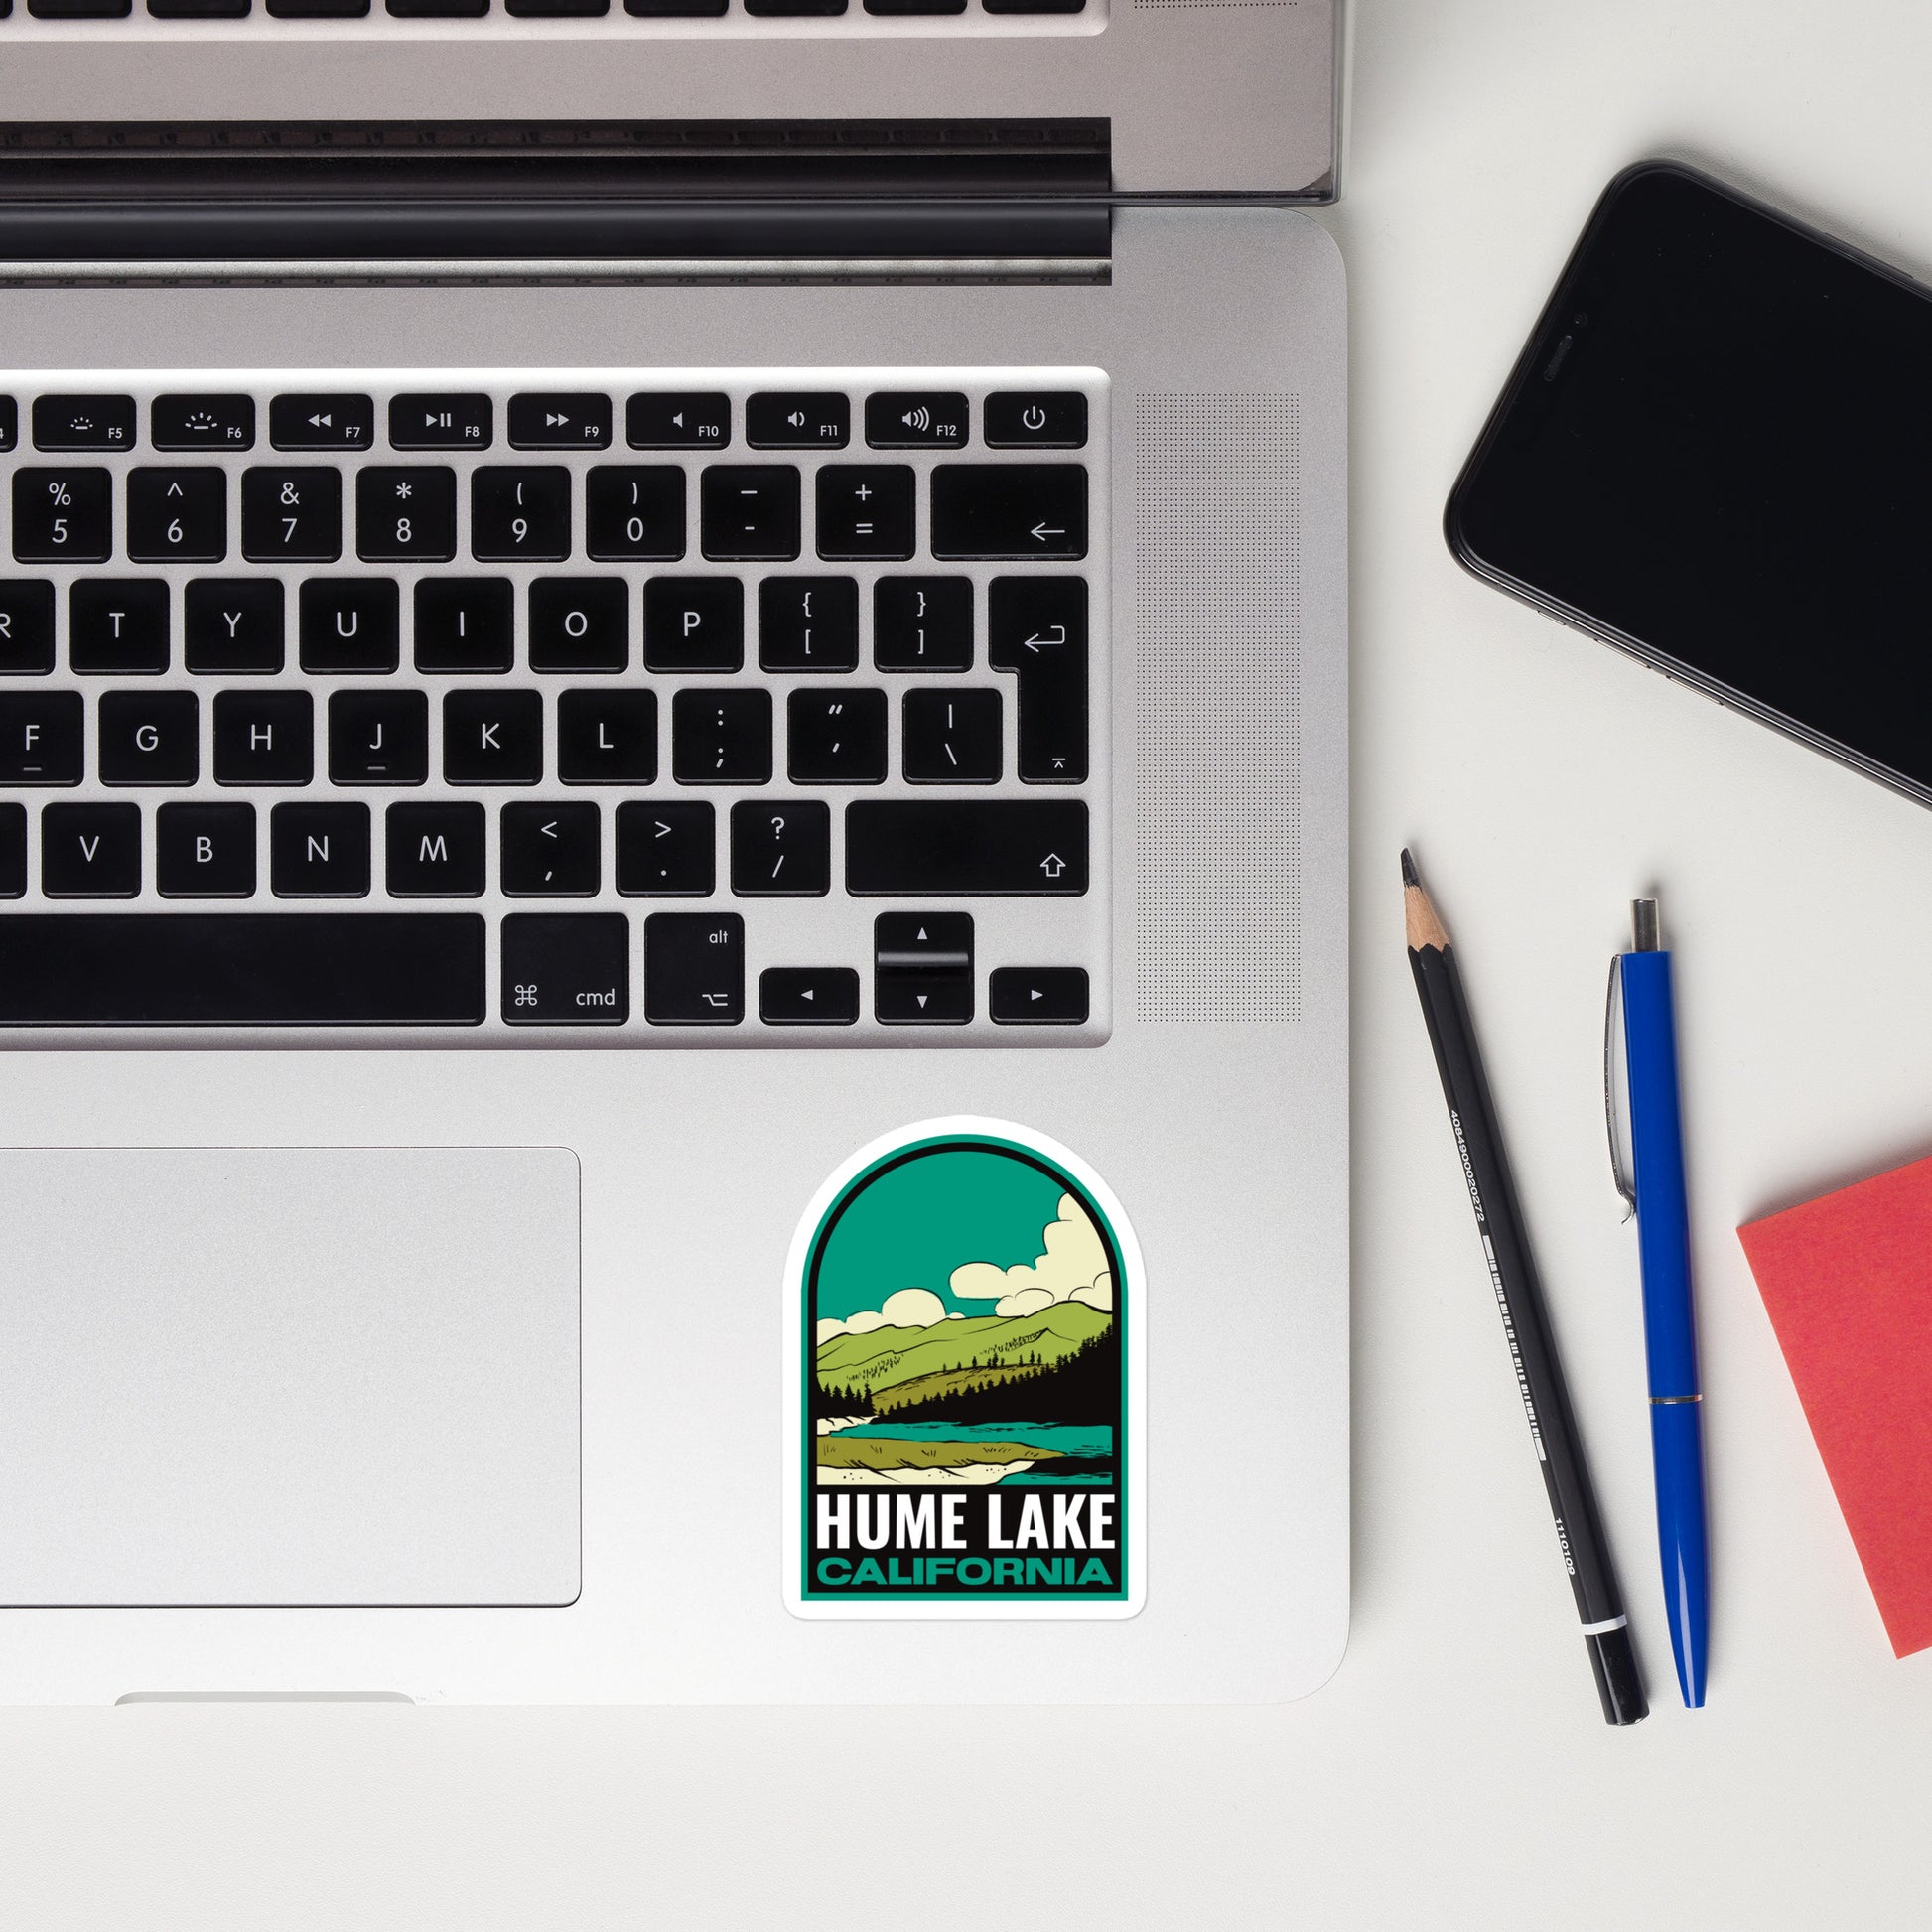 A sticker of Hume Lake California on a laptop